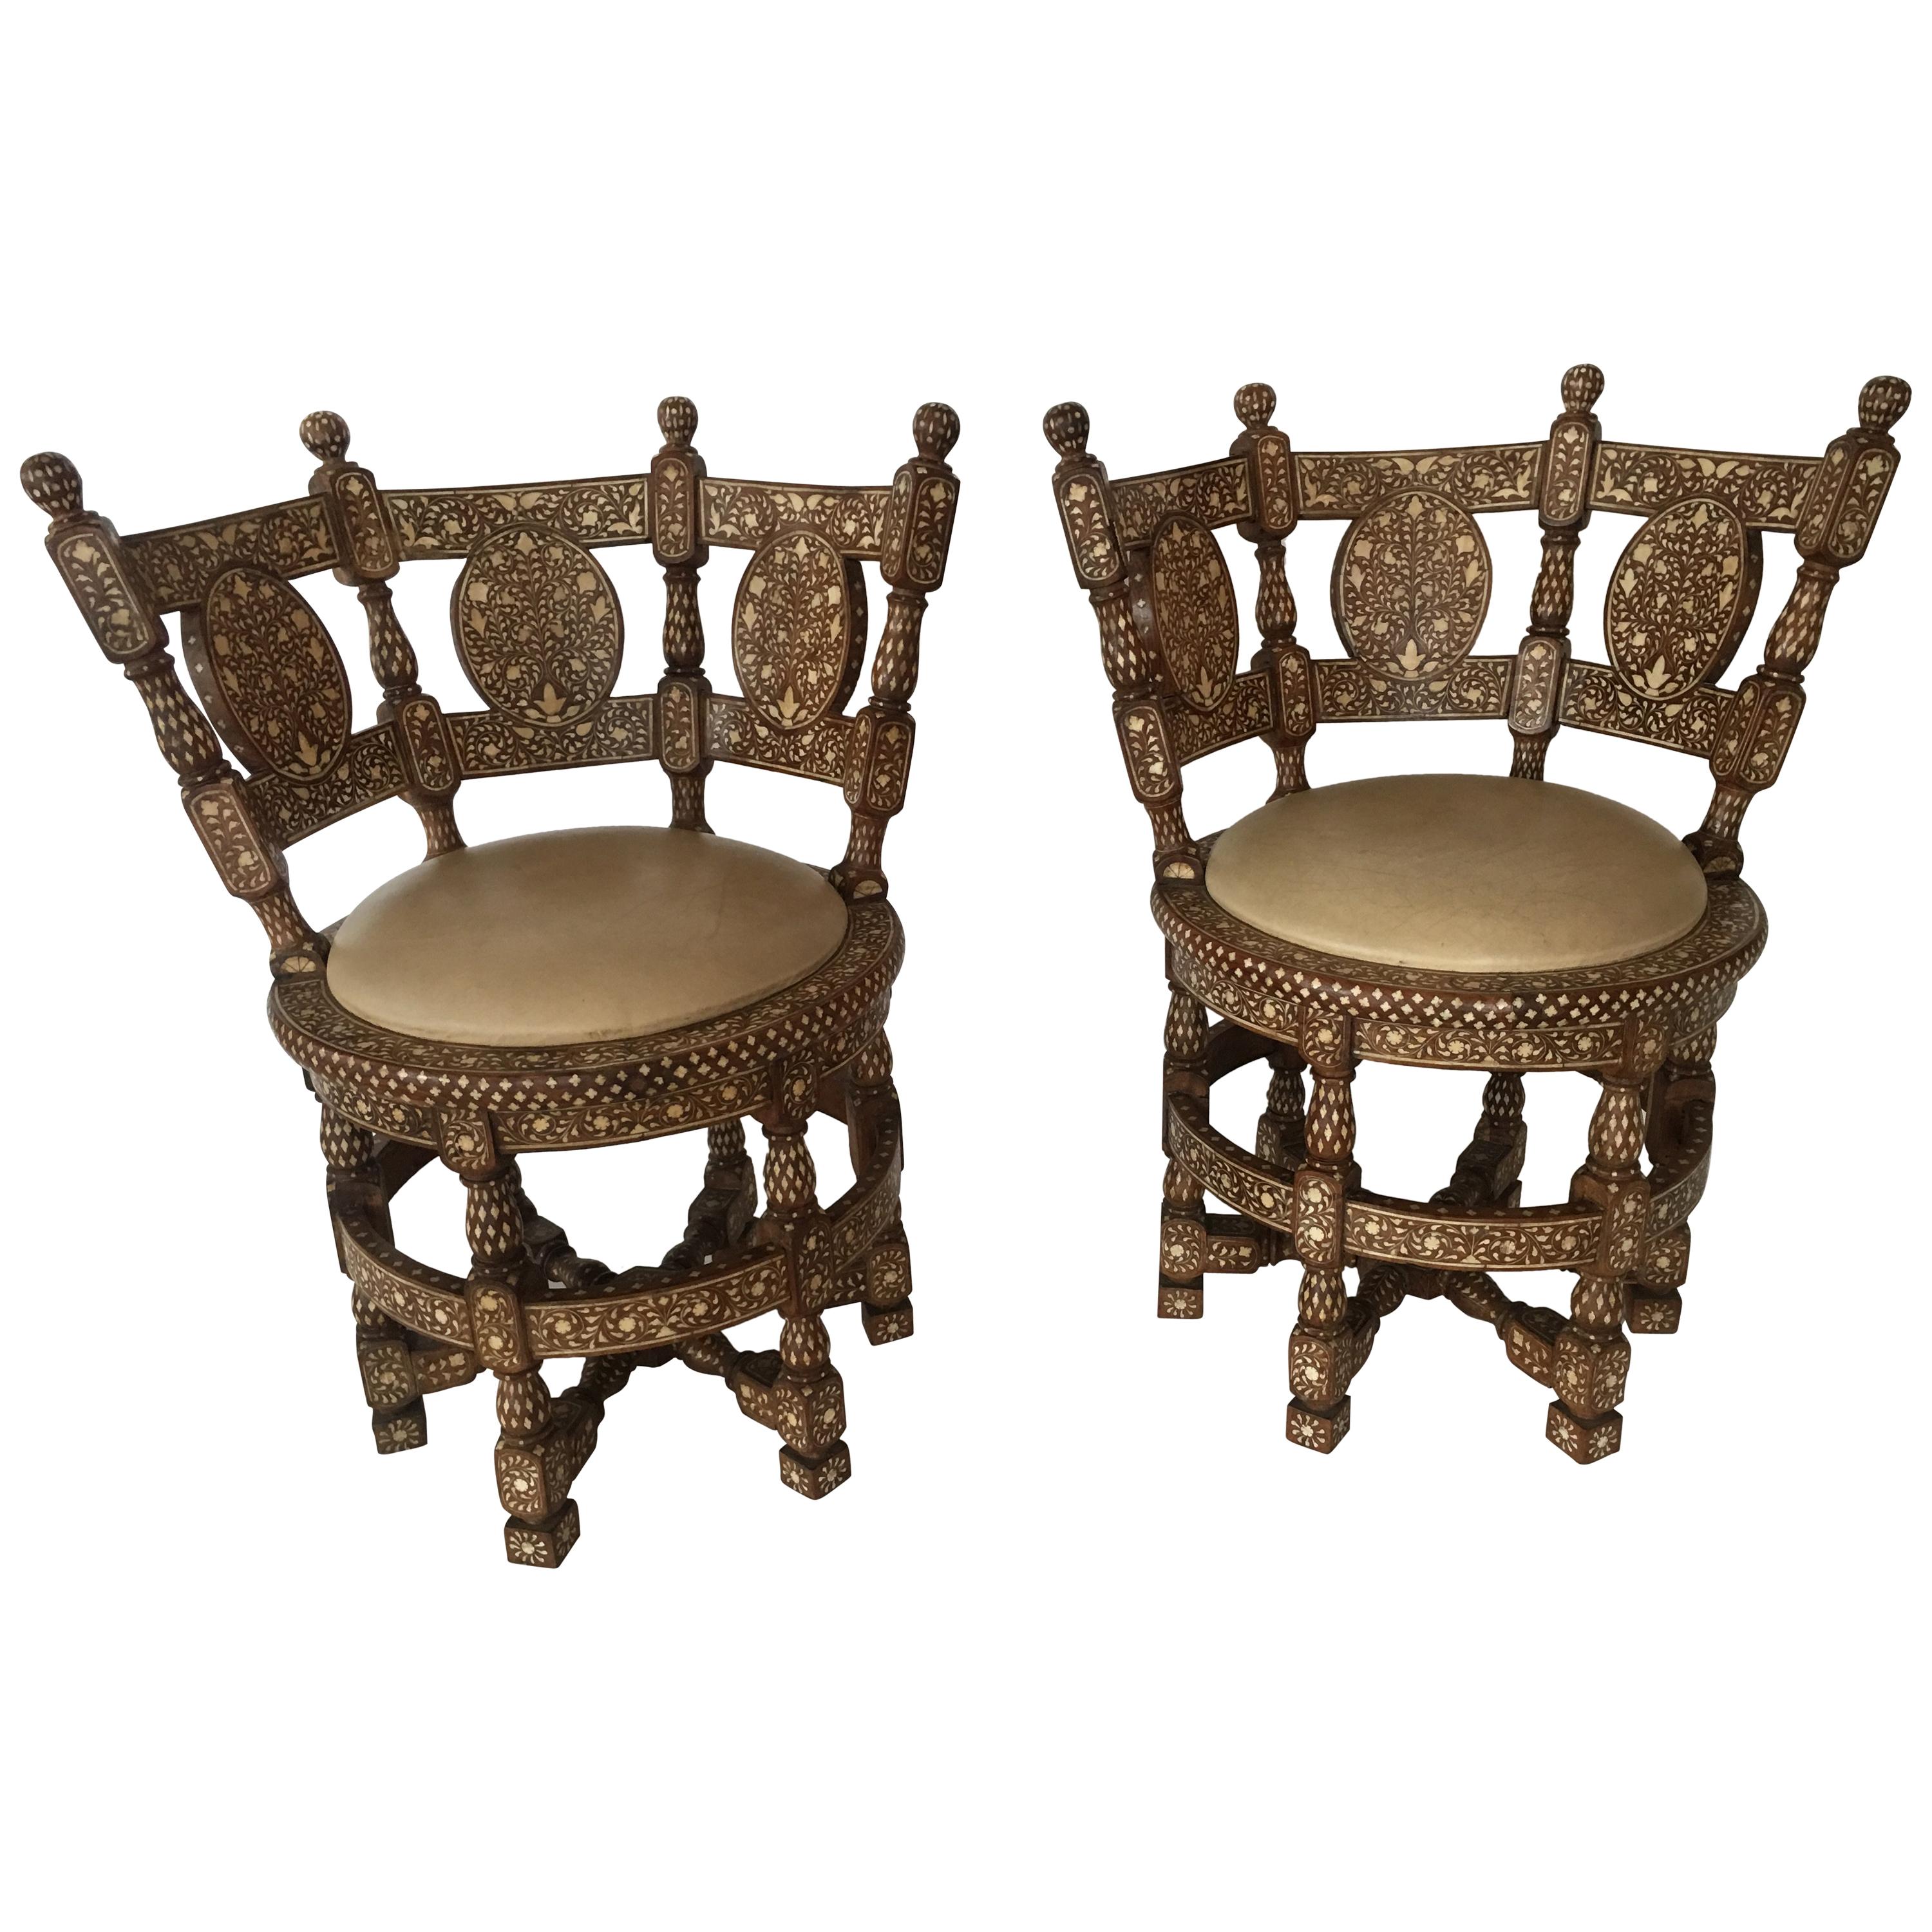 Pair of Colonial lounge chairs. Wood and upholstered Spinneybeck leather, 19th century.